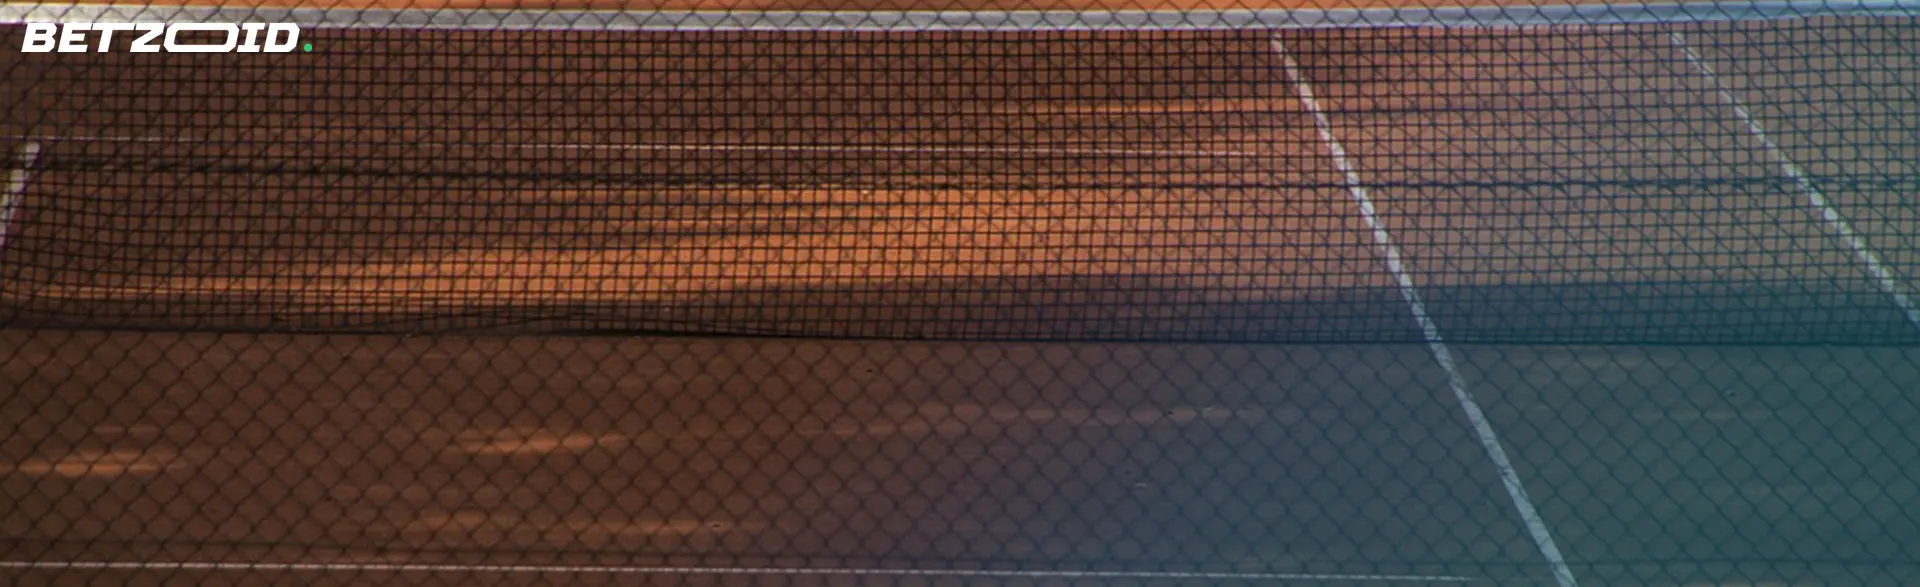 Close-up view of a tennis net, casting a shadow on a clay court.